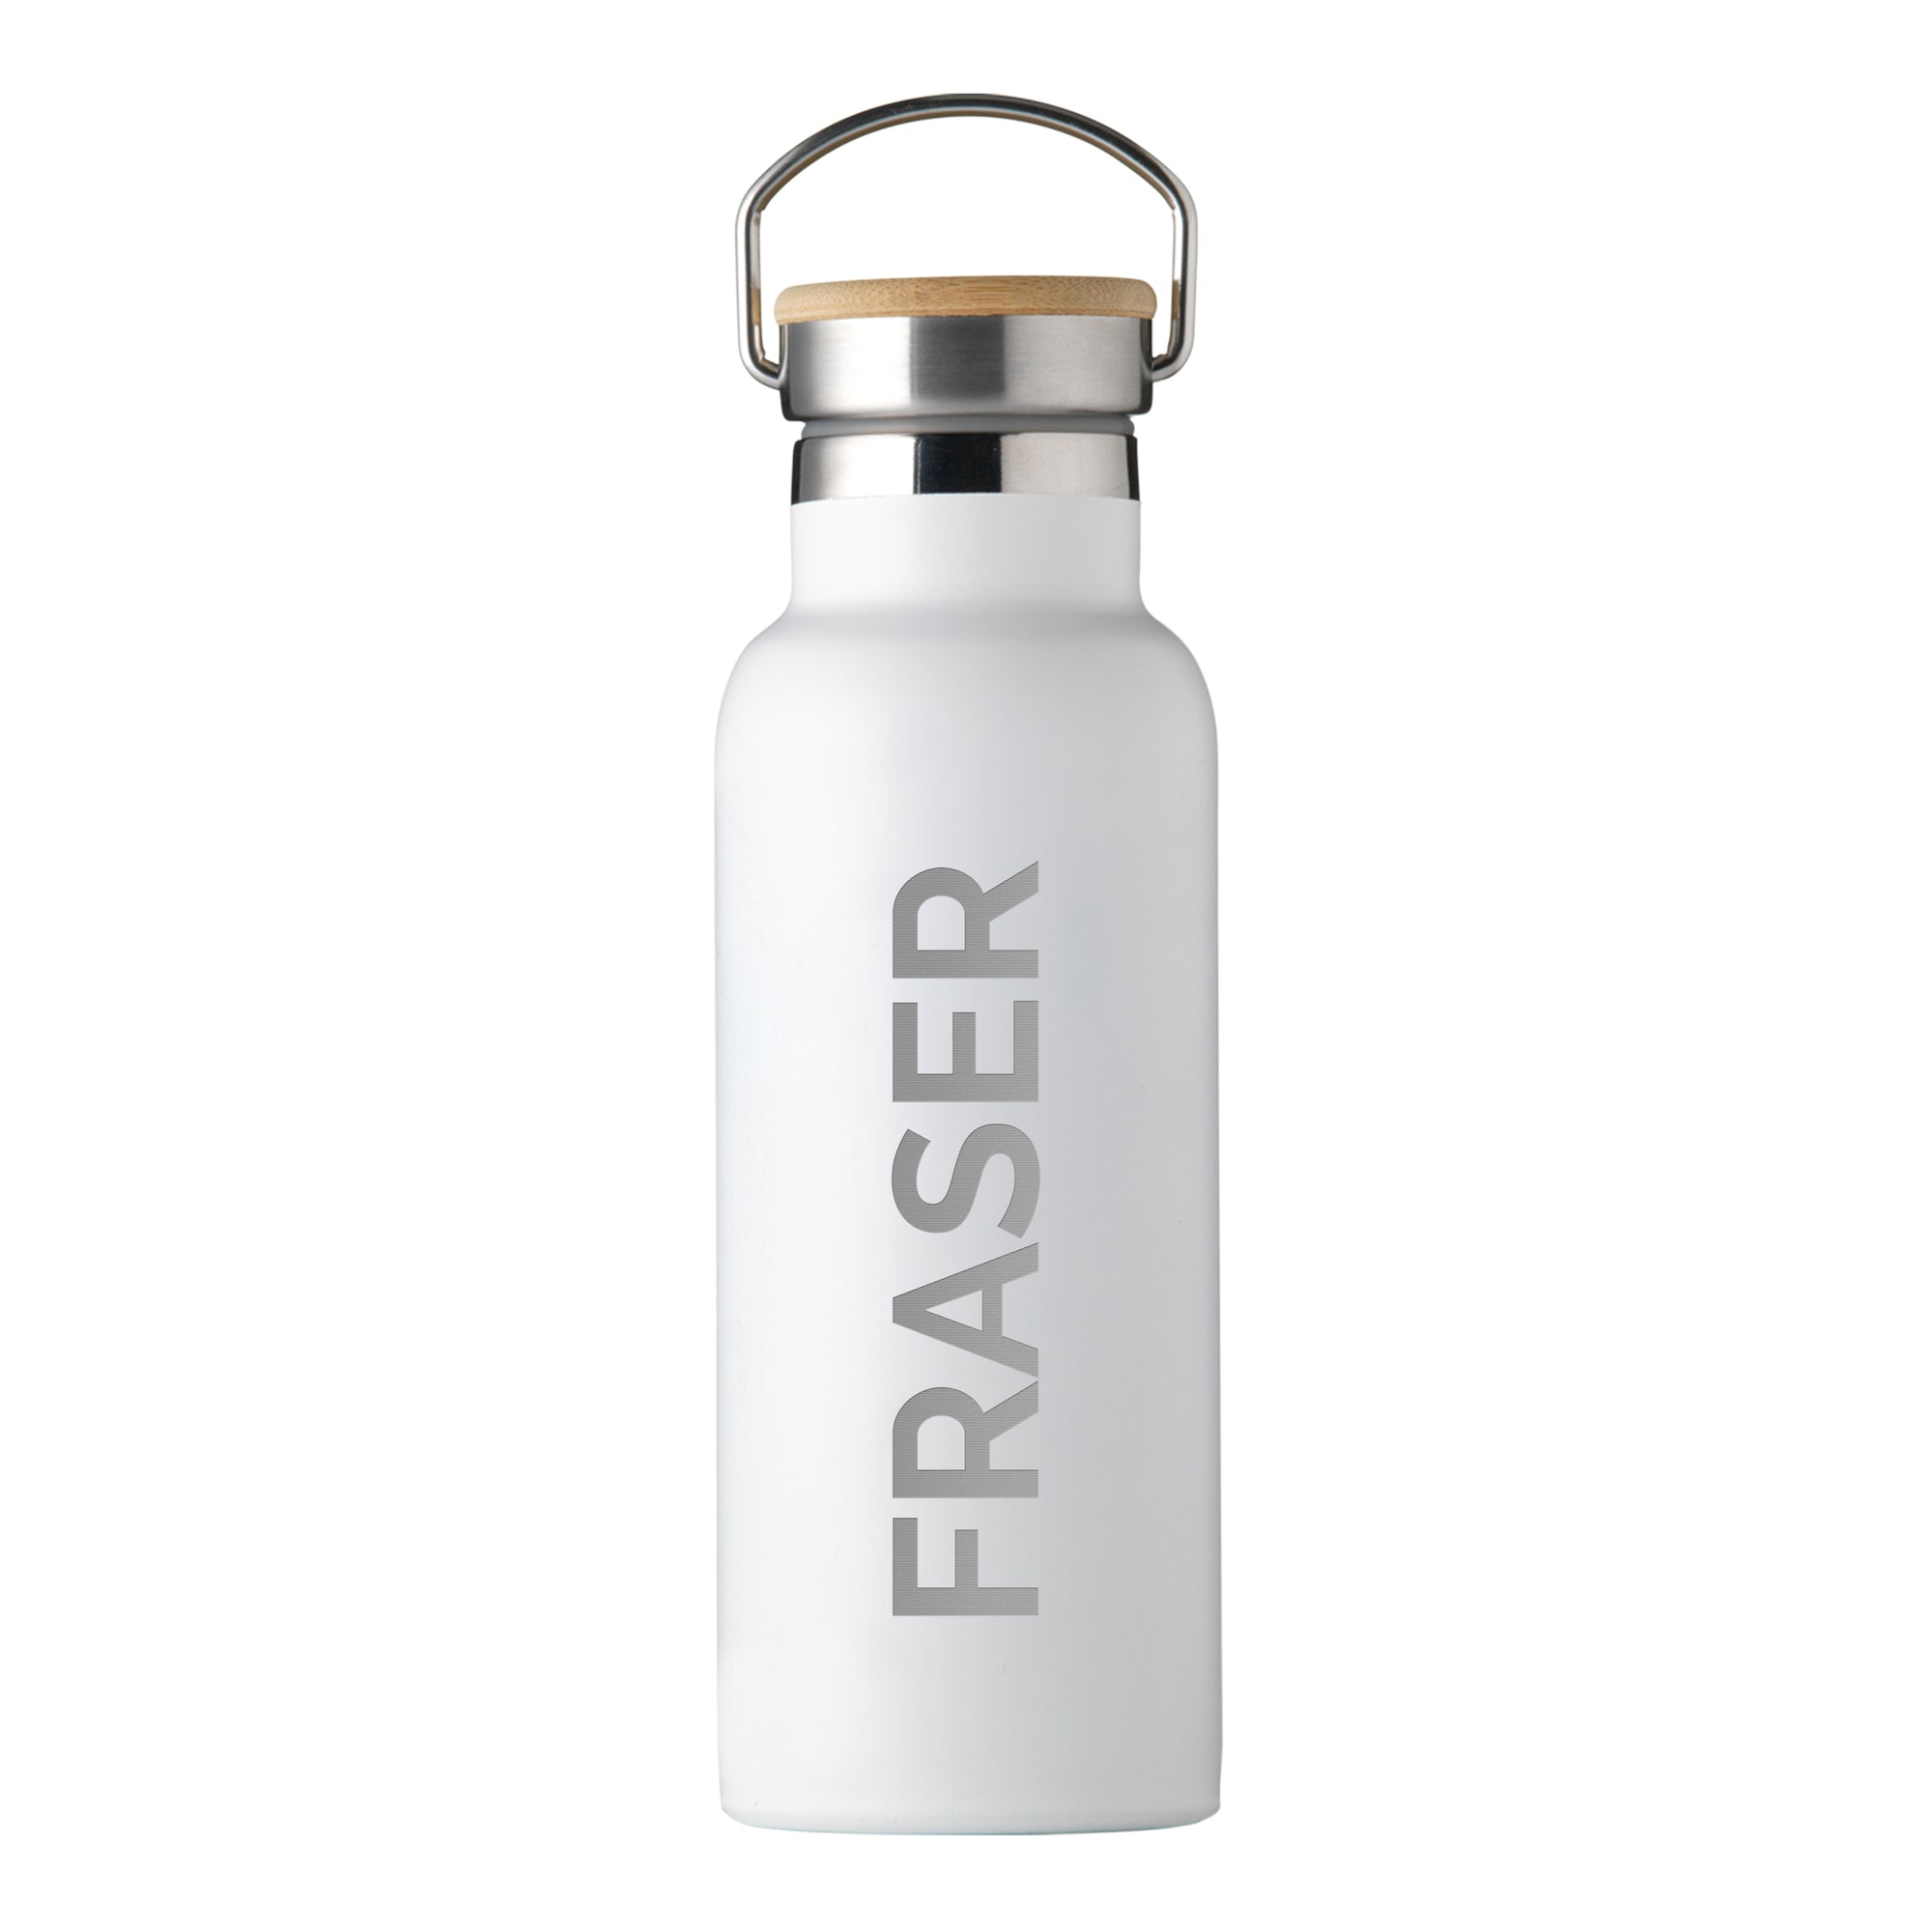 Personalised insulated drinks bottle in matt white. The bottle has a leak proof bamboo vacuum sealed lid and a carry handle. The bottle can be personalised in a name of your choice which will be printed down the side of the bottle in large uppercase letters.